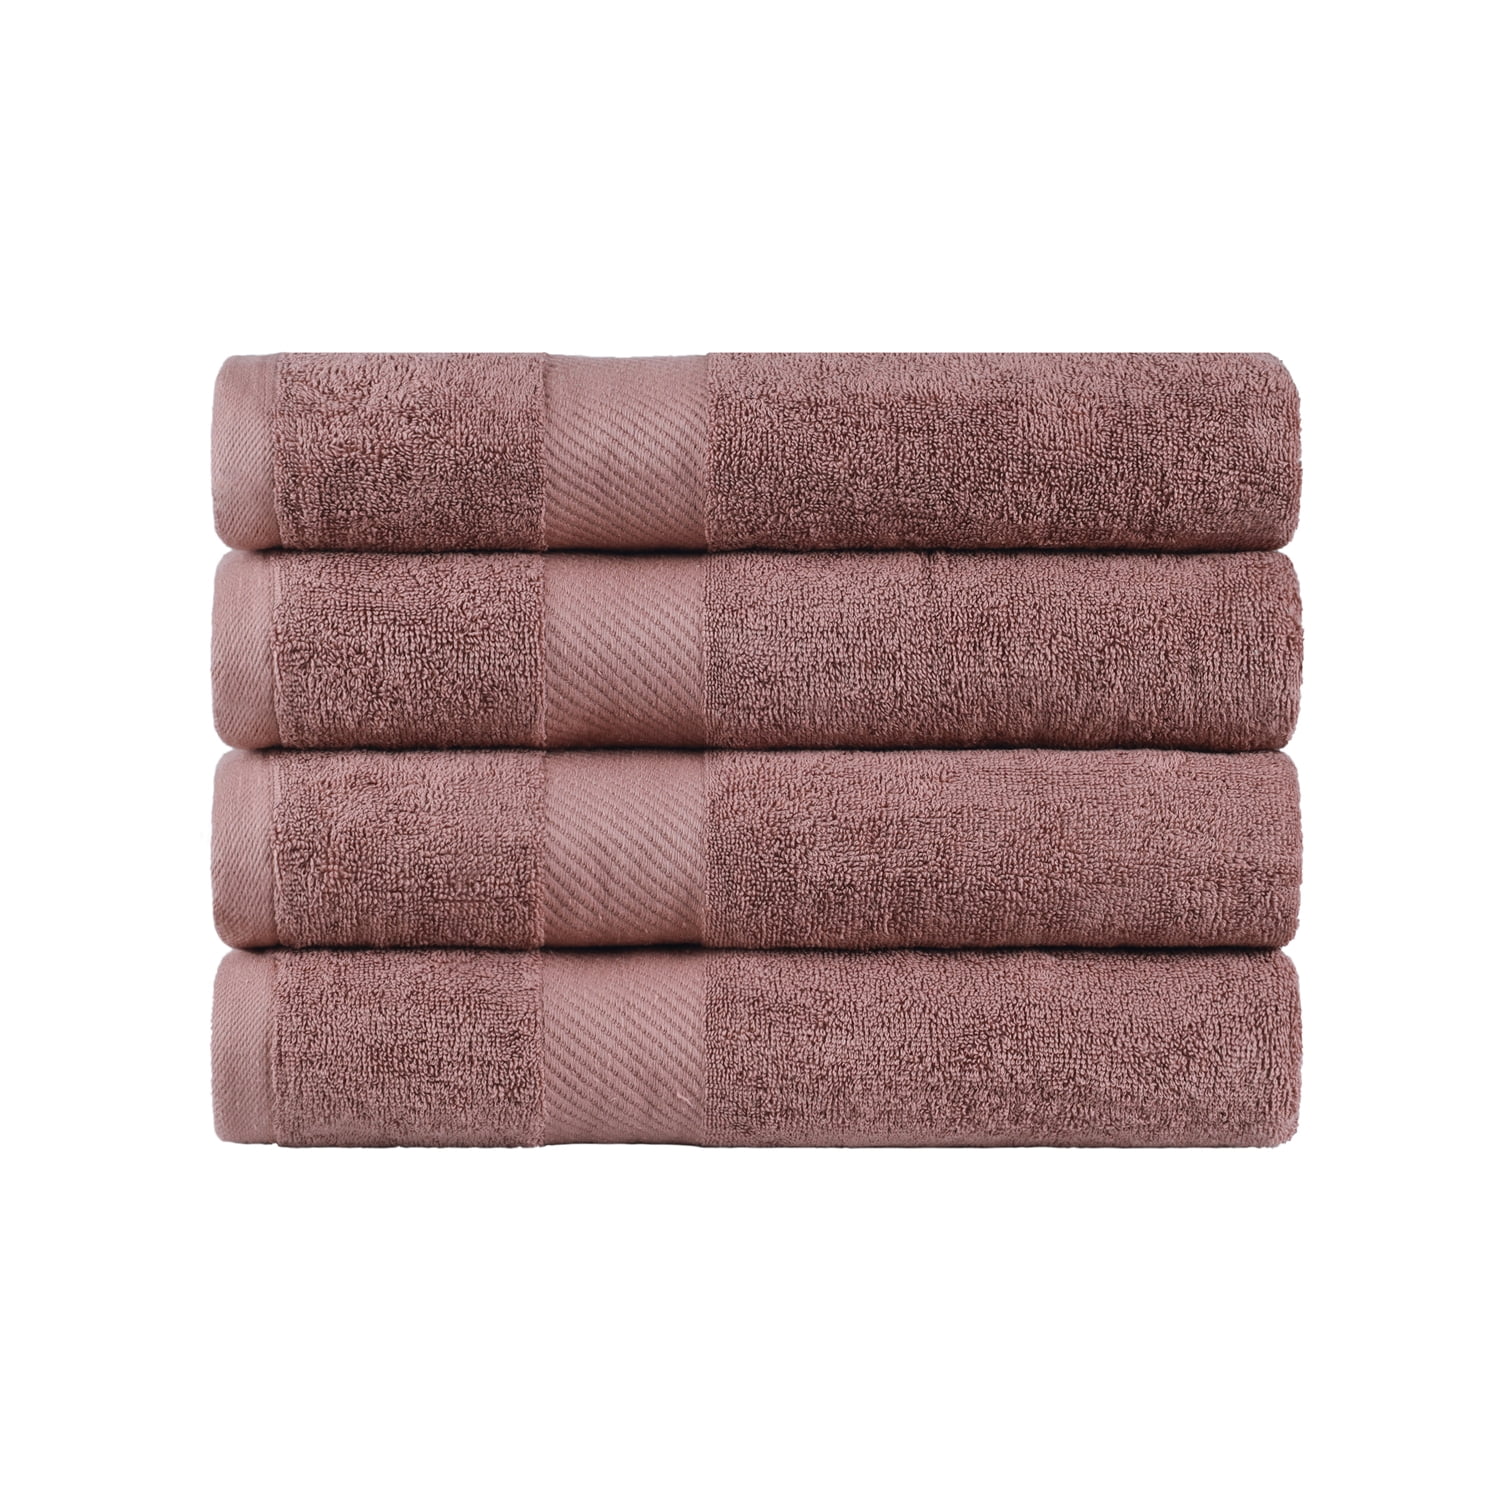  SUPERIOR Egyptian Cotton 800 GSM Towel Set, Includes 2 Bath  Towels, 2 Hand Towels, 2 Face Towels, Luxury Plush Bathroom Essentials,  Ultra Thick, Spa, Shower, Guest Bath, Apartment, Home, Charcoal : Home &  Kitchen